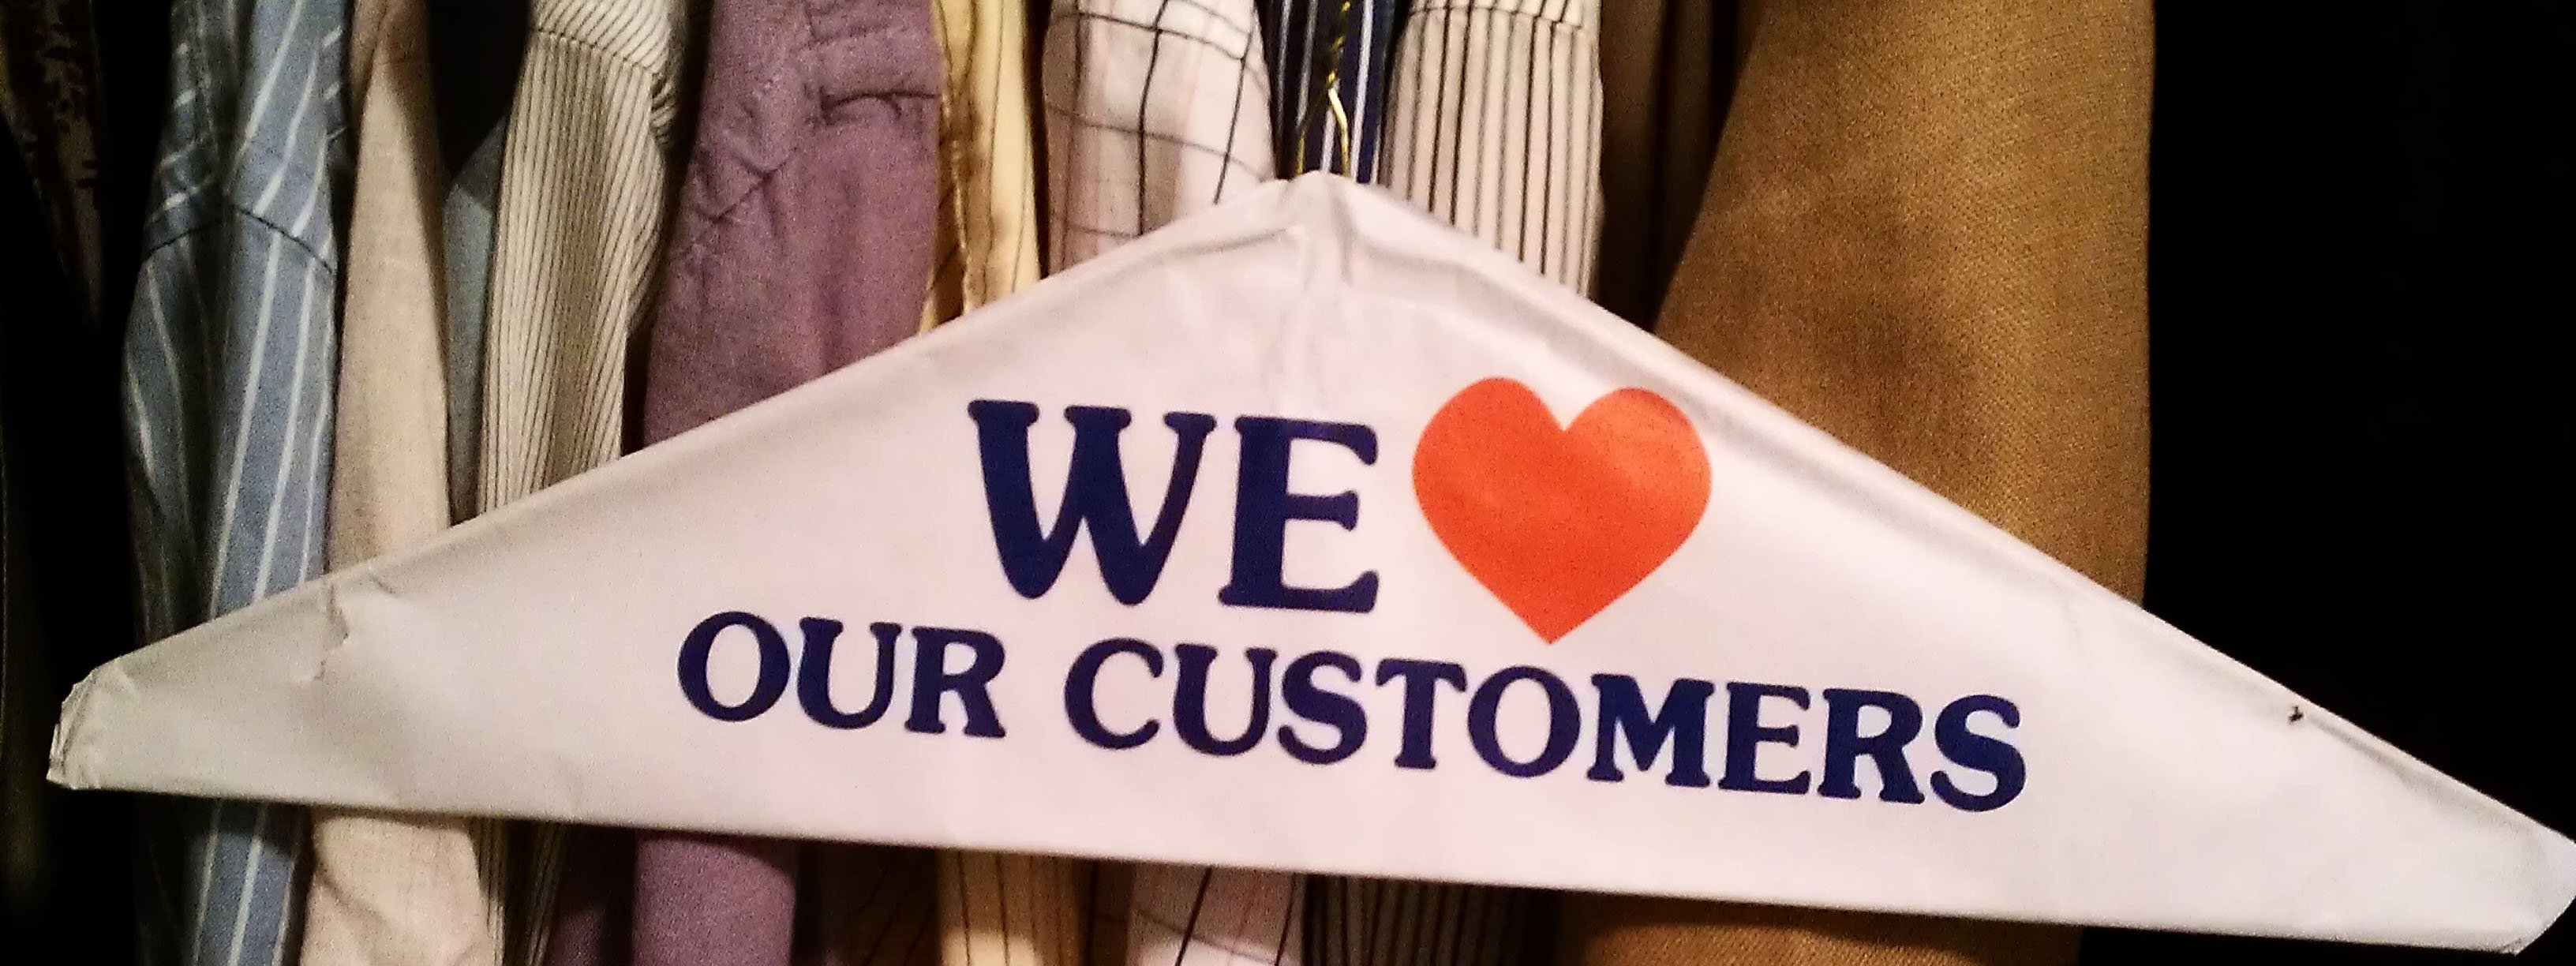 Love Your Customers